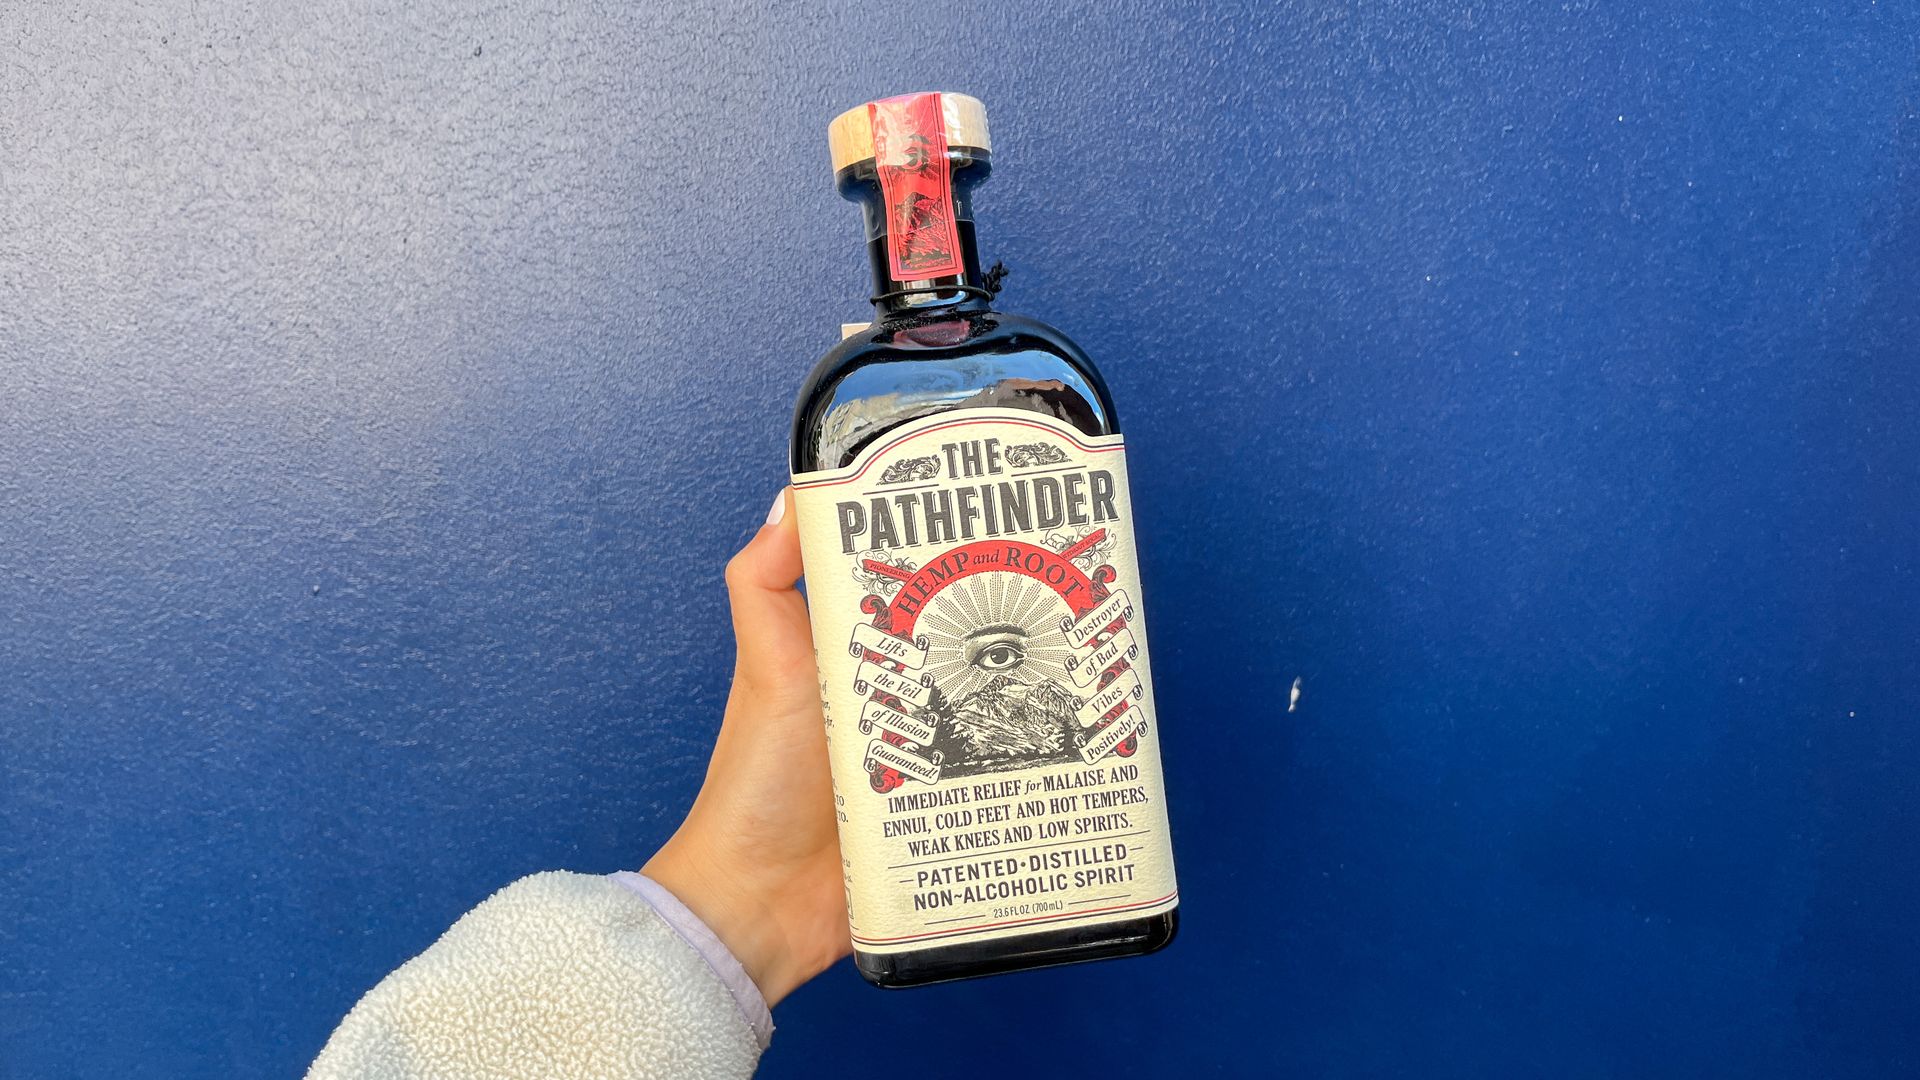 A hand holding up a bottle of The Pathfinder: Hemp & Root in front of a blue background.